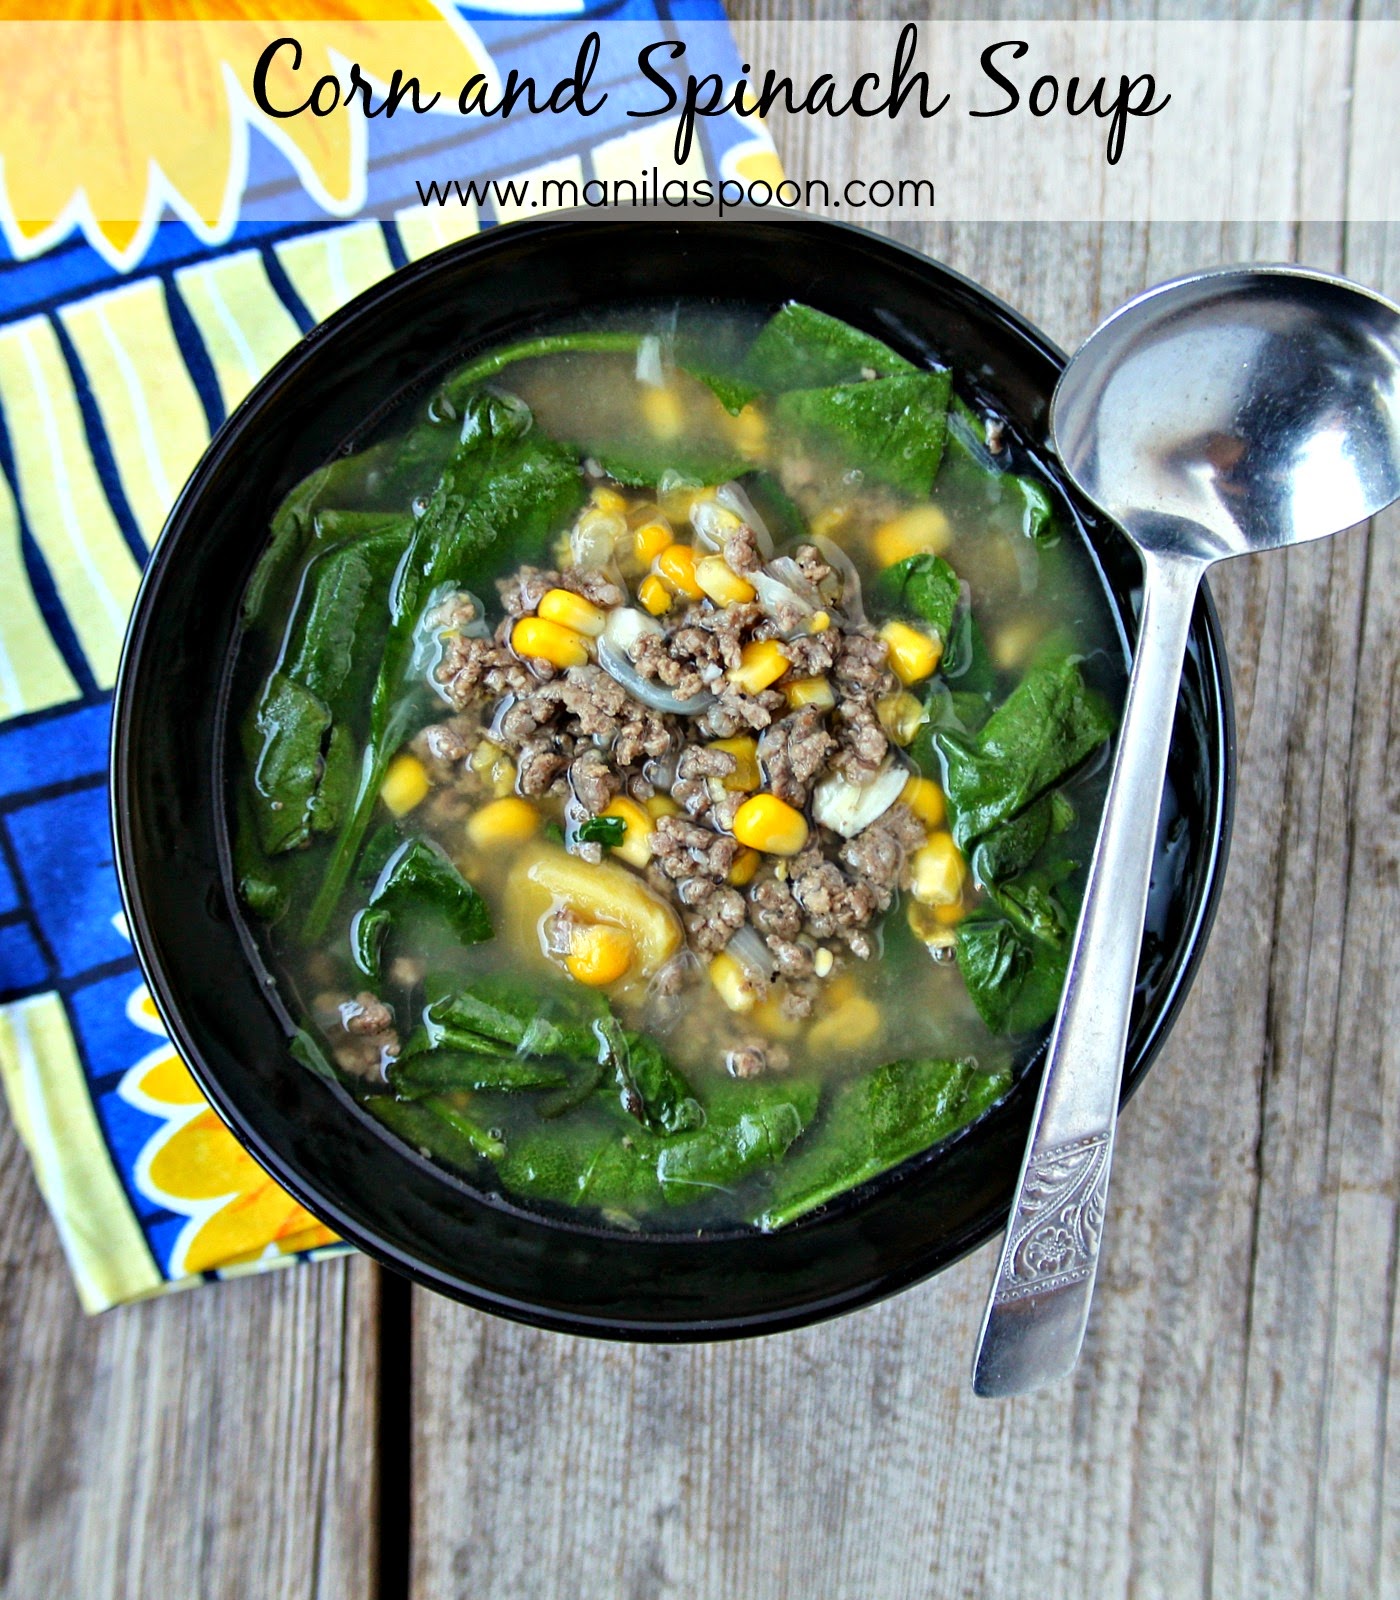 With corn, spinach and meat and flavored with ginger for extra zing, this simple soup is tasty, healthy and easy to make.